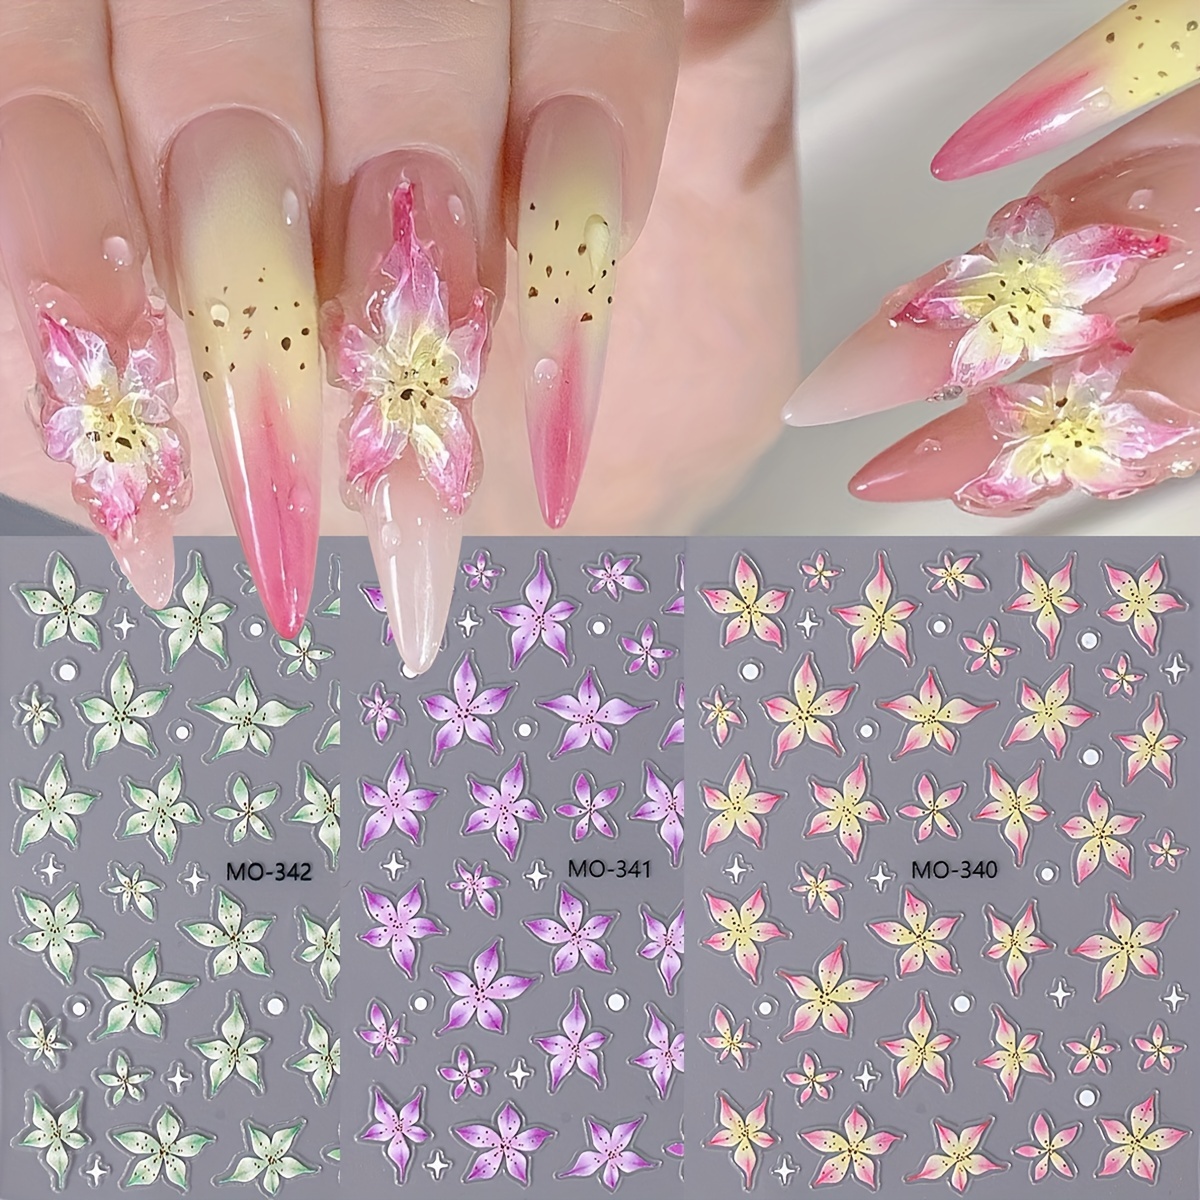 

3 Sheets Pink Lily Flower Nail Art Stickers 3d Purple Green Crystal Lily Petals Delicate Nail Decals Diy Design Charms Nail Art Decorations